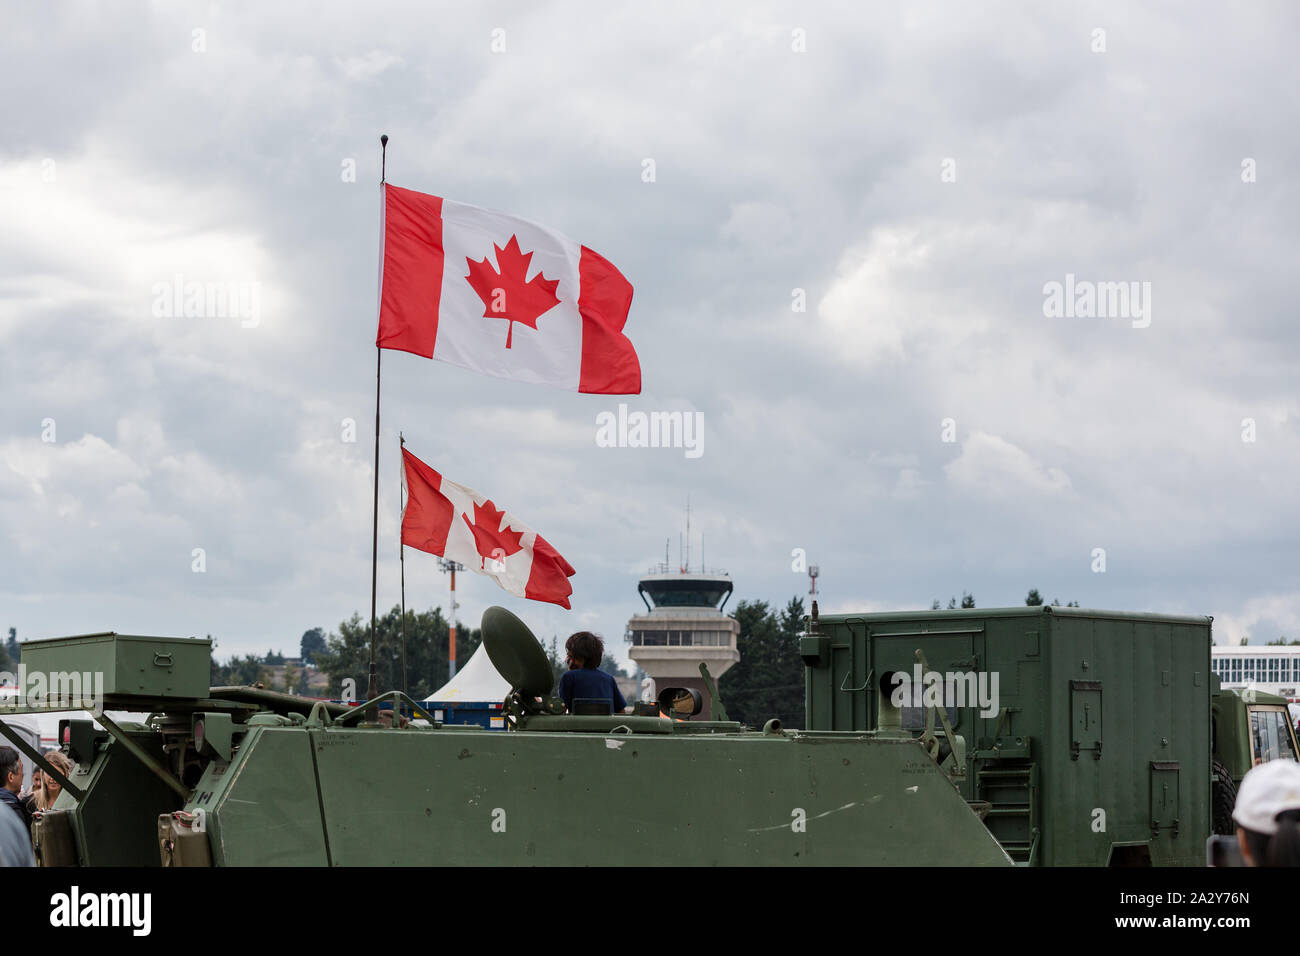 ABBOTSFORD, BC, CANADA - AUG 11, 2019: Canadian military vehicles on display at the Abbotsford International Airshow. Stock Photo